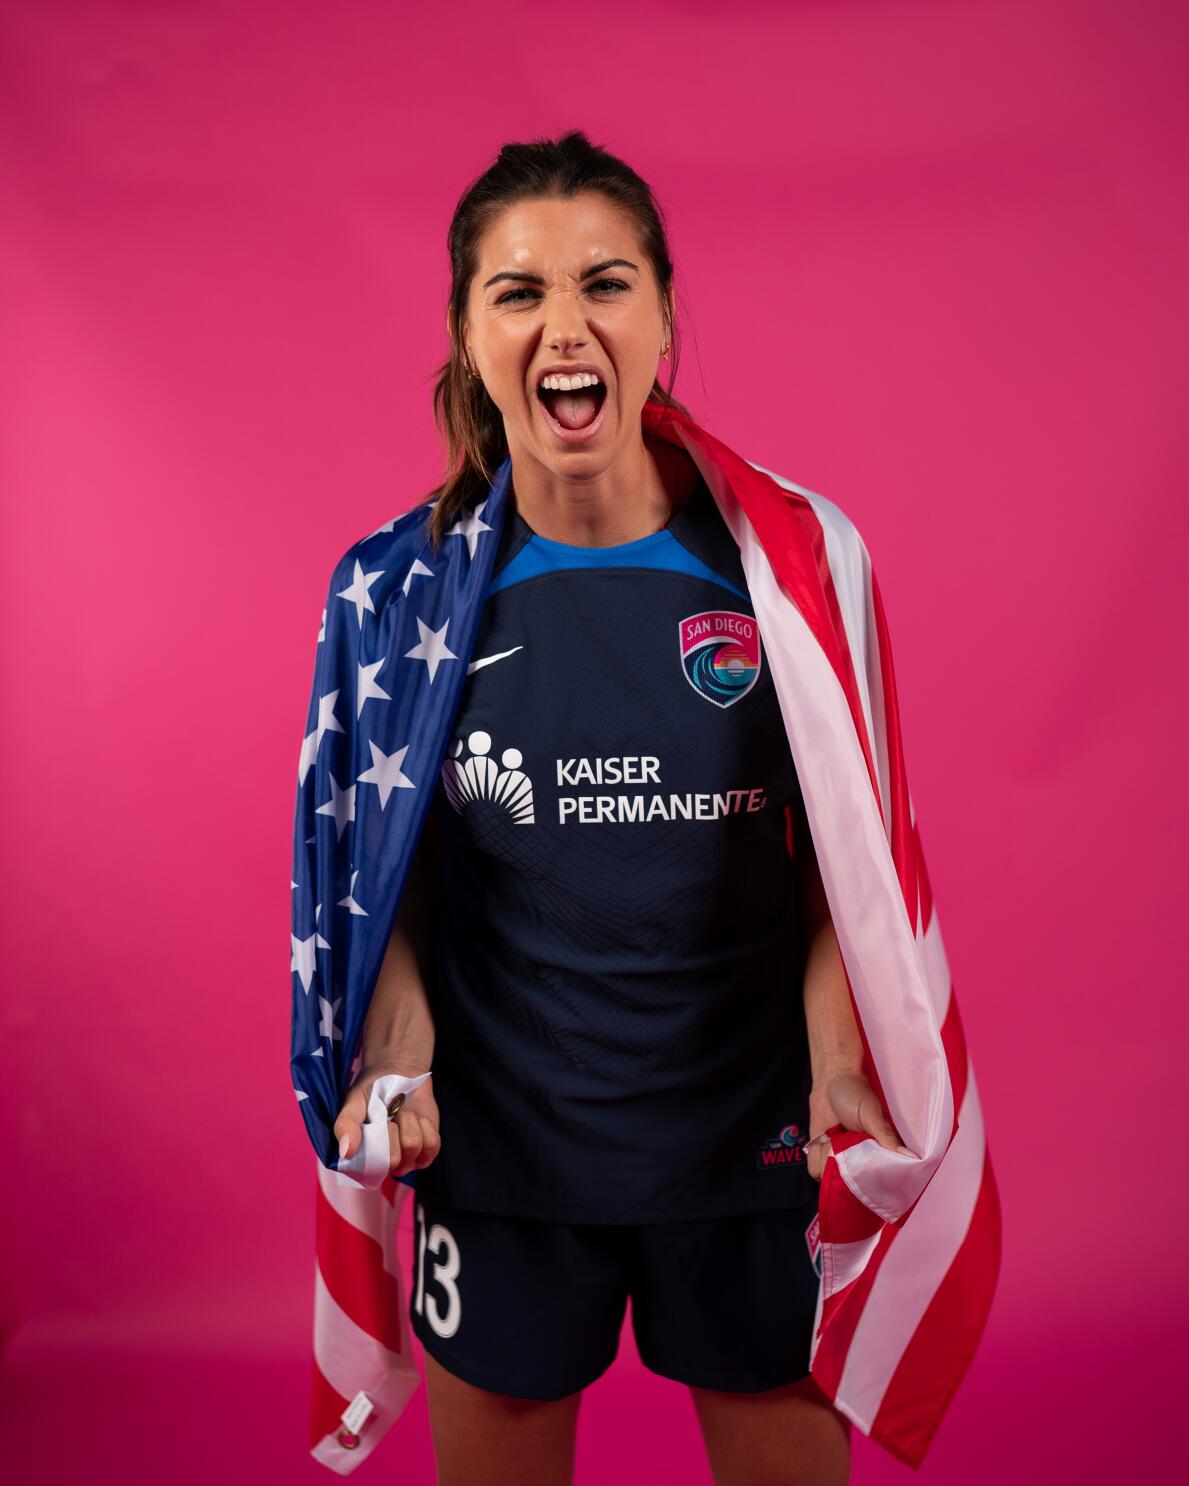 Get a pressed and signed Alex Morgan jersey by heading to our Instagra